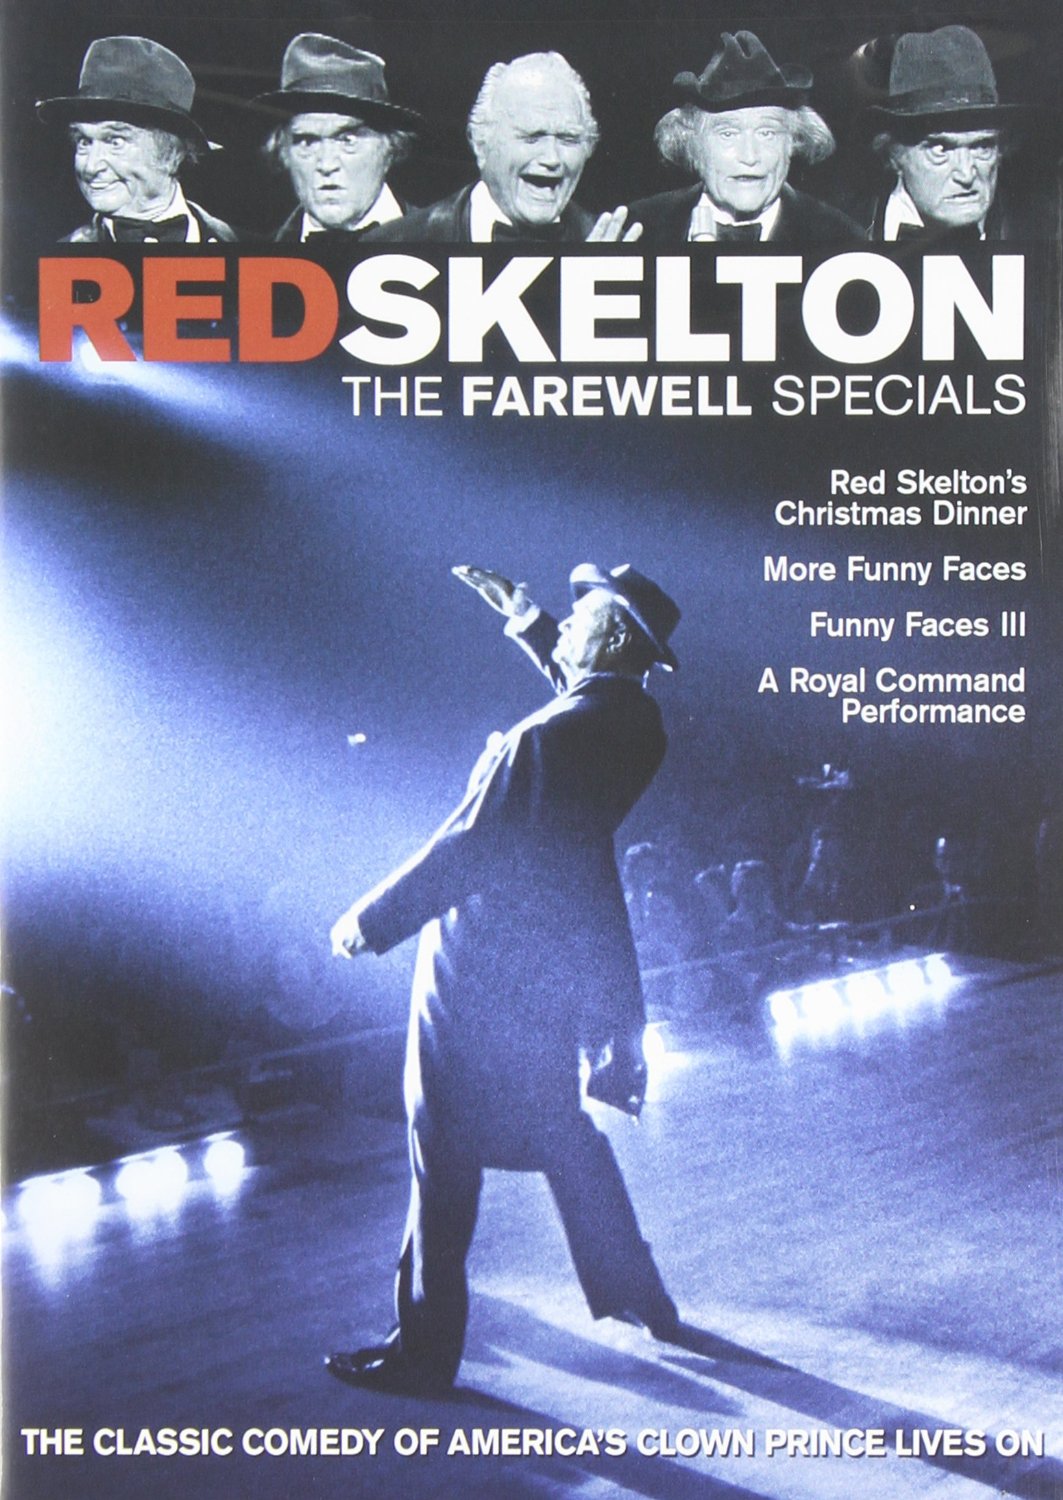 Red Skelton - The Farewell Specials